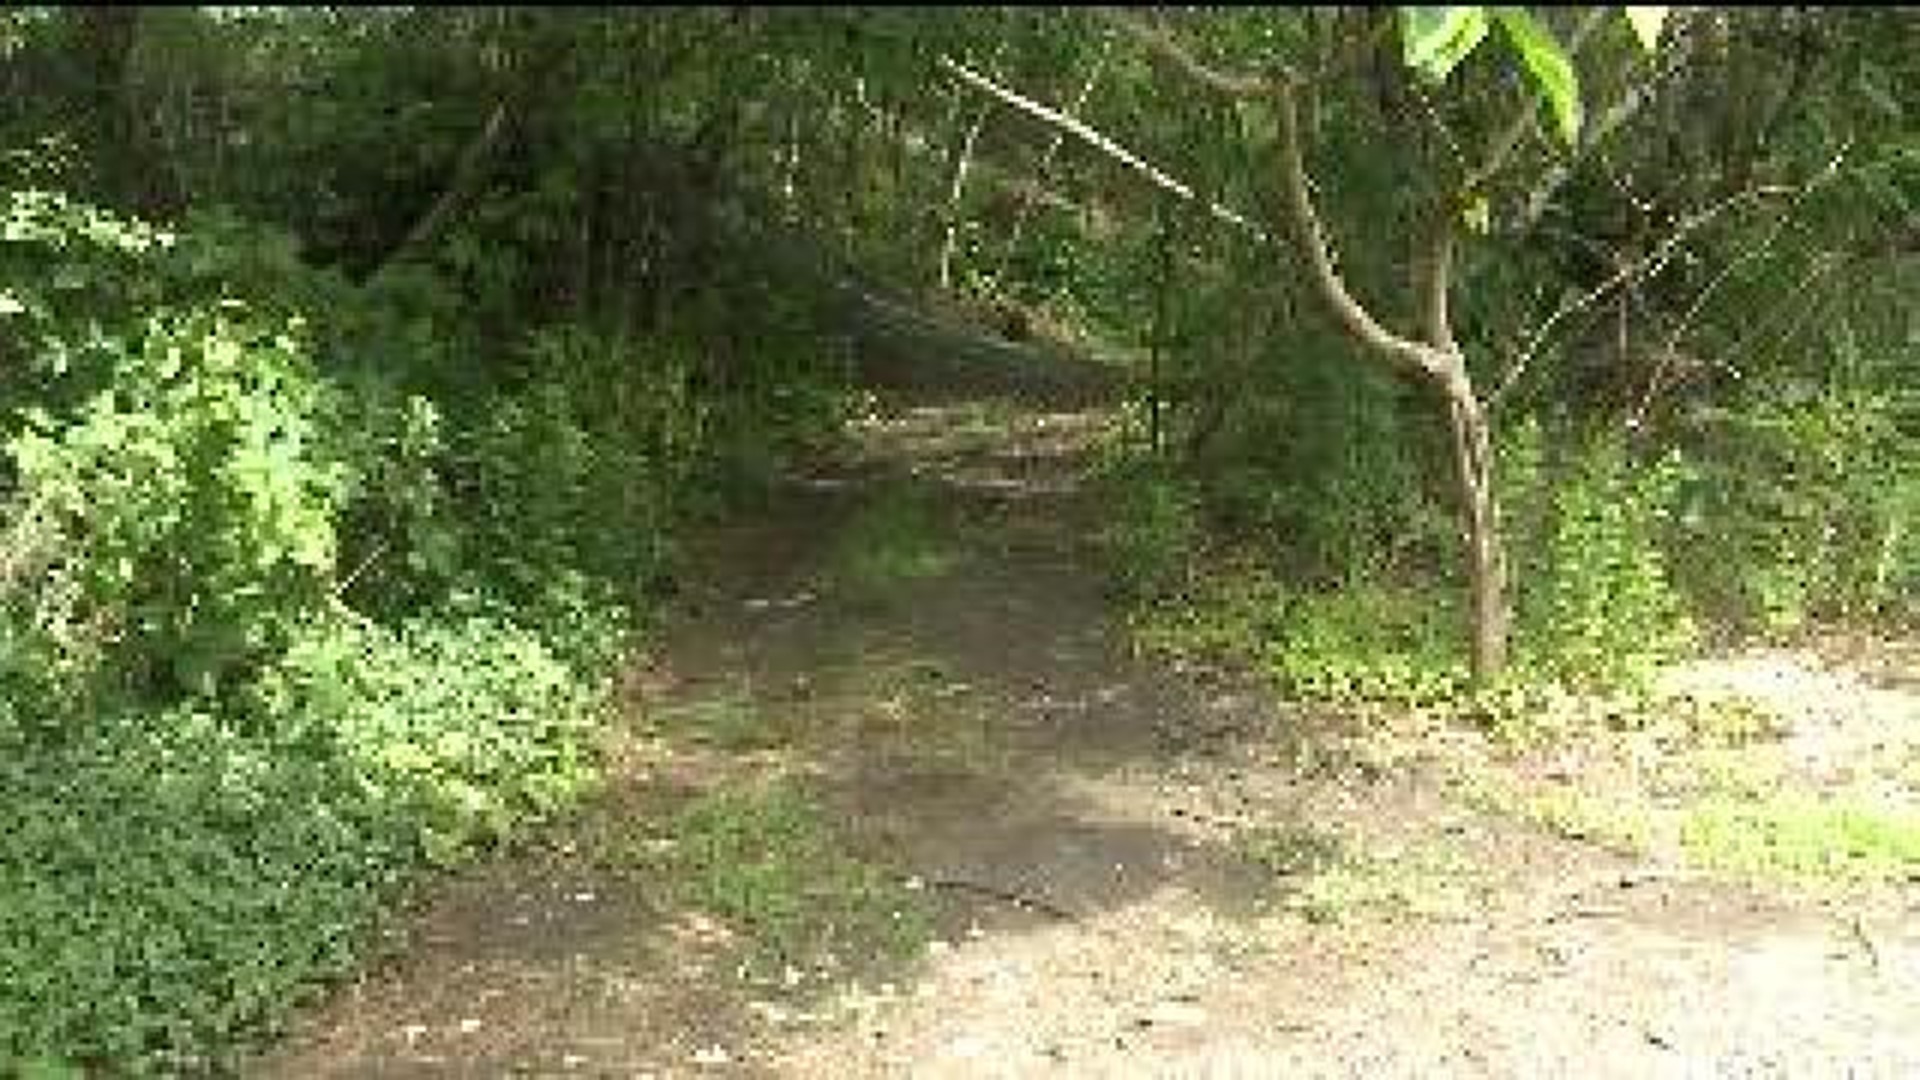 Teen Shot While Riding Dirt Bike in Wooded Area